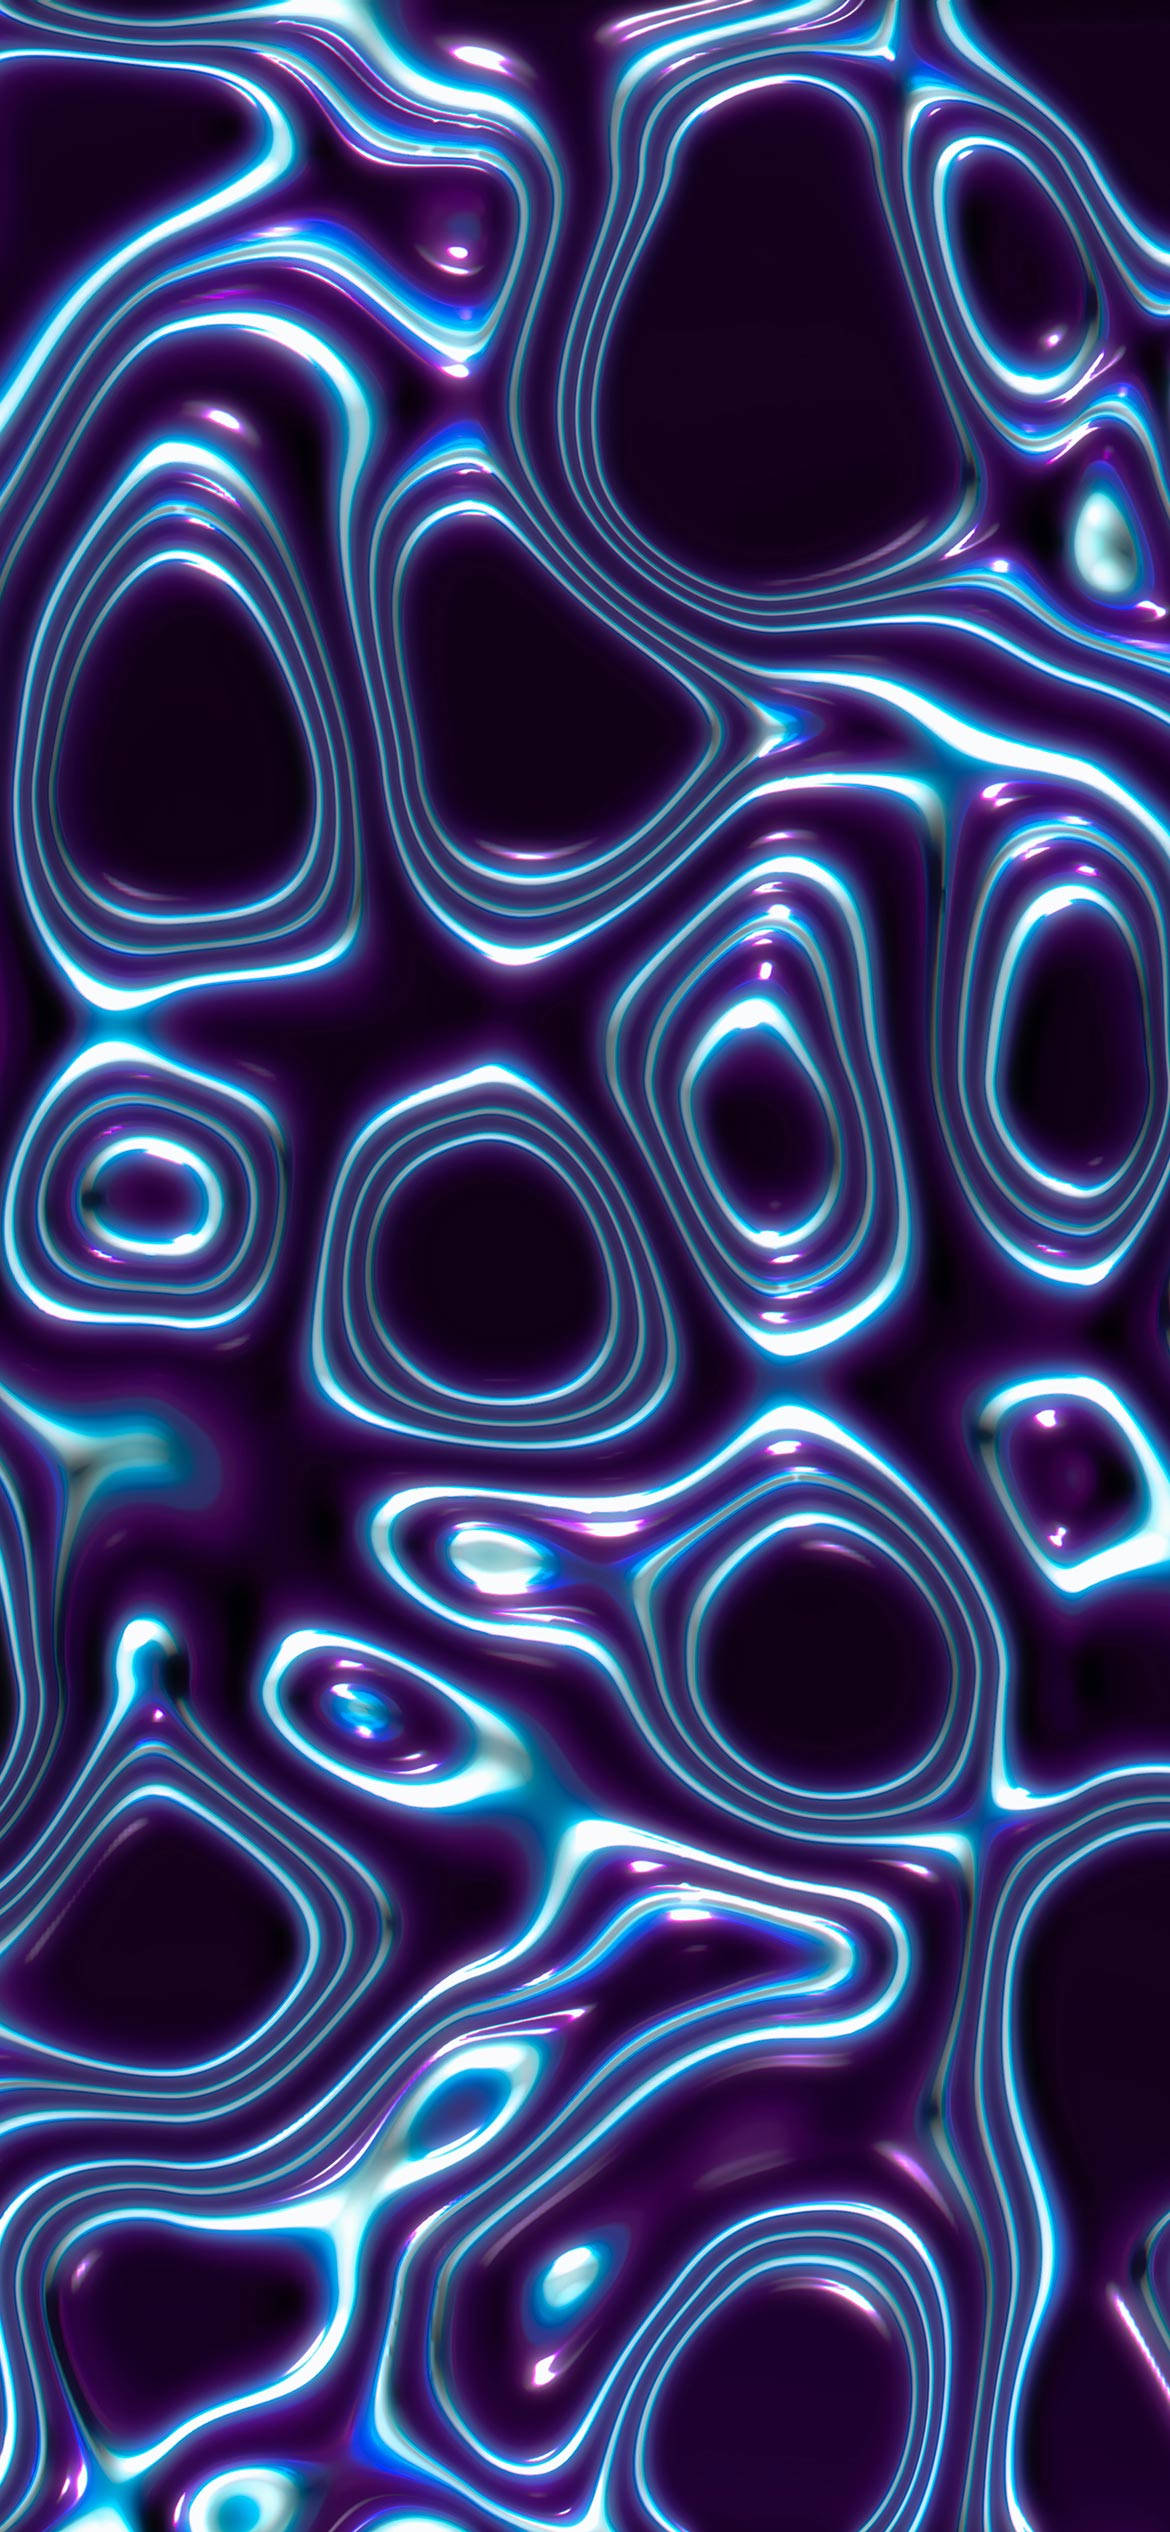 Download Iphone 14 Pro 3d Microscopic Blue Wallpaper 